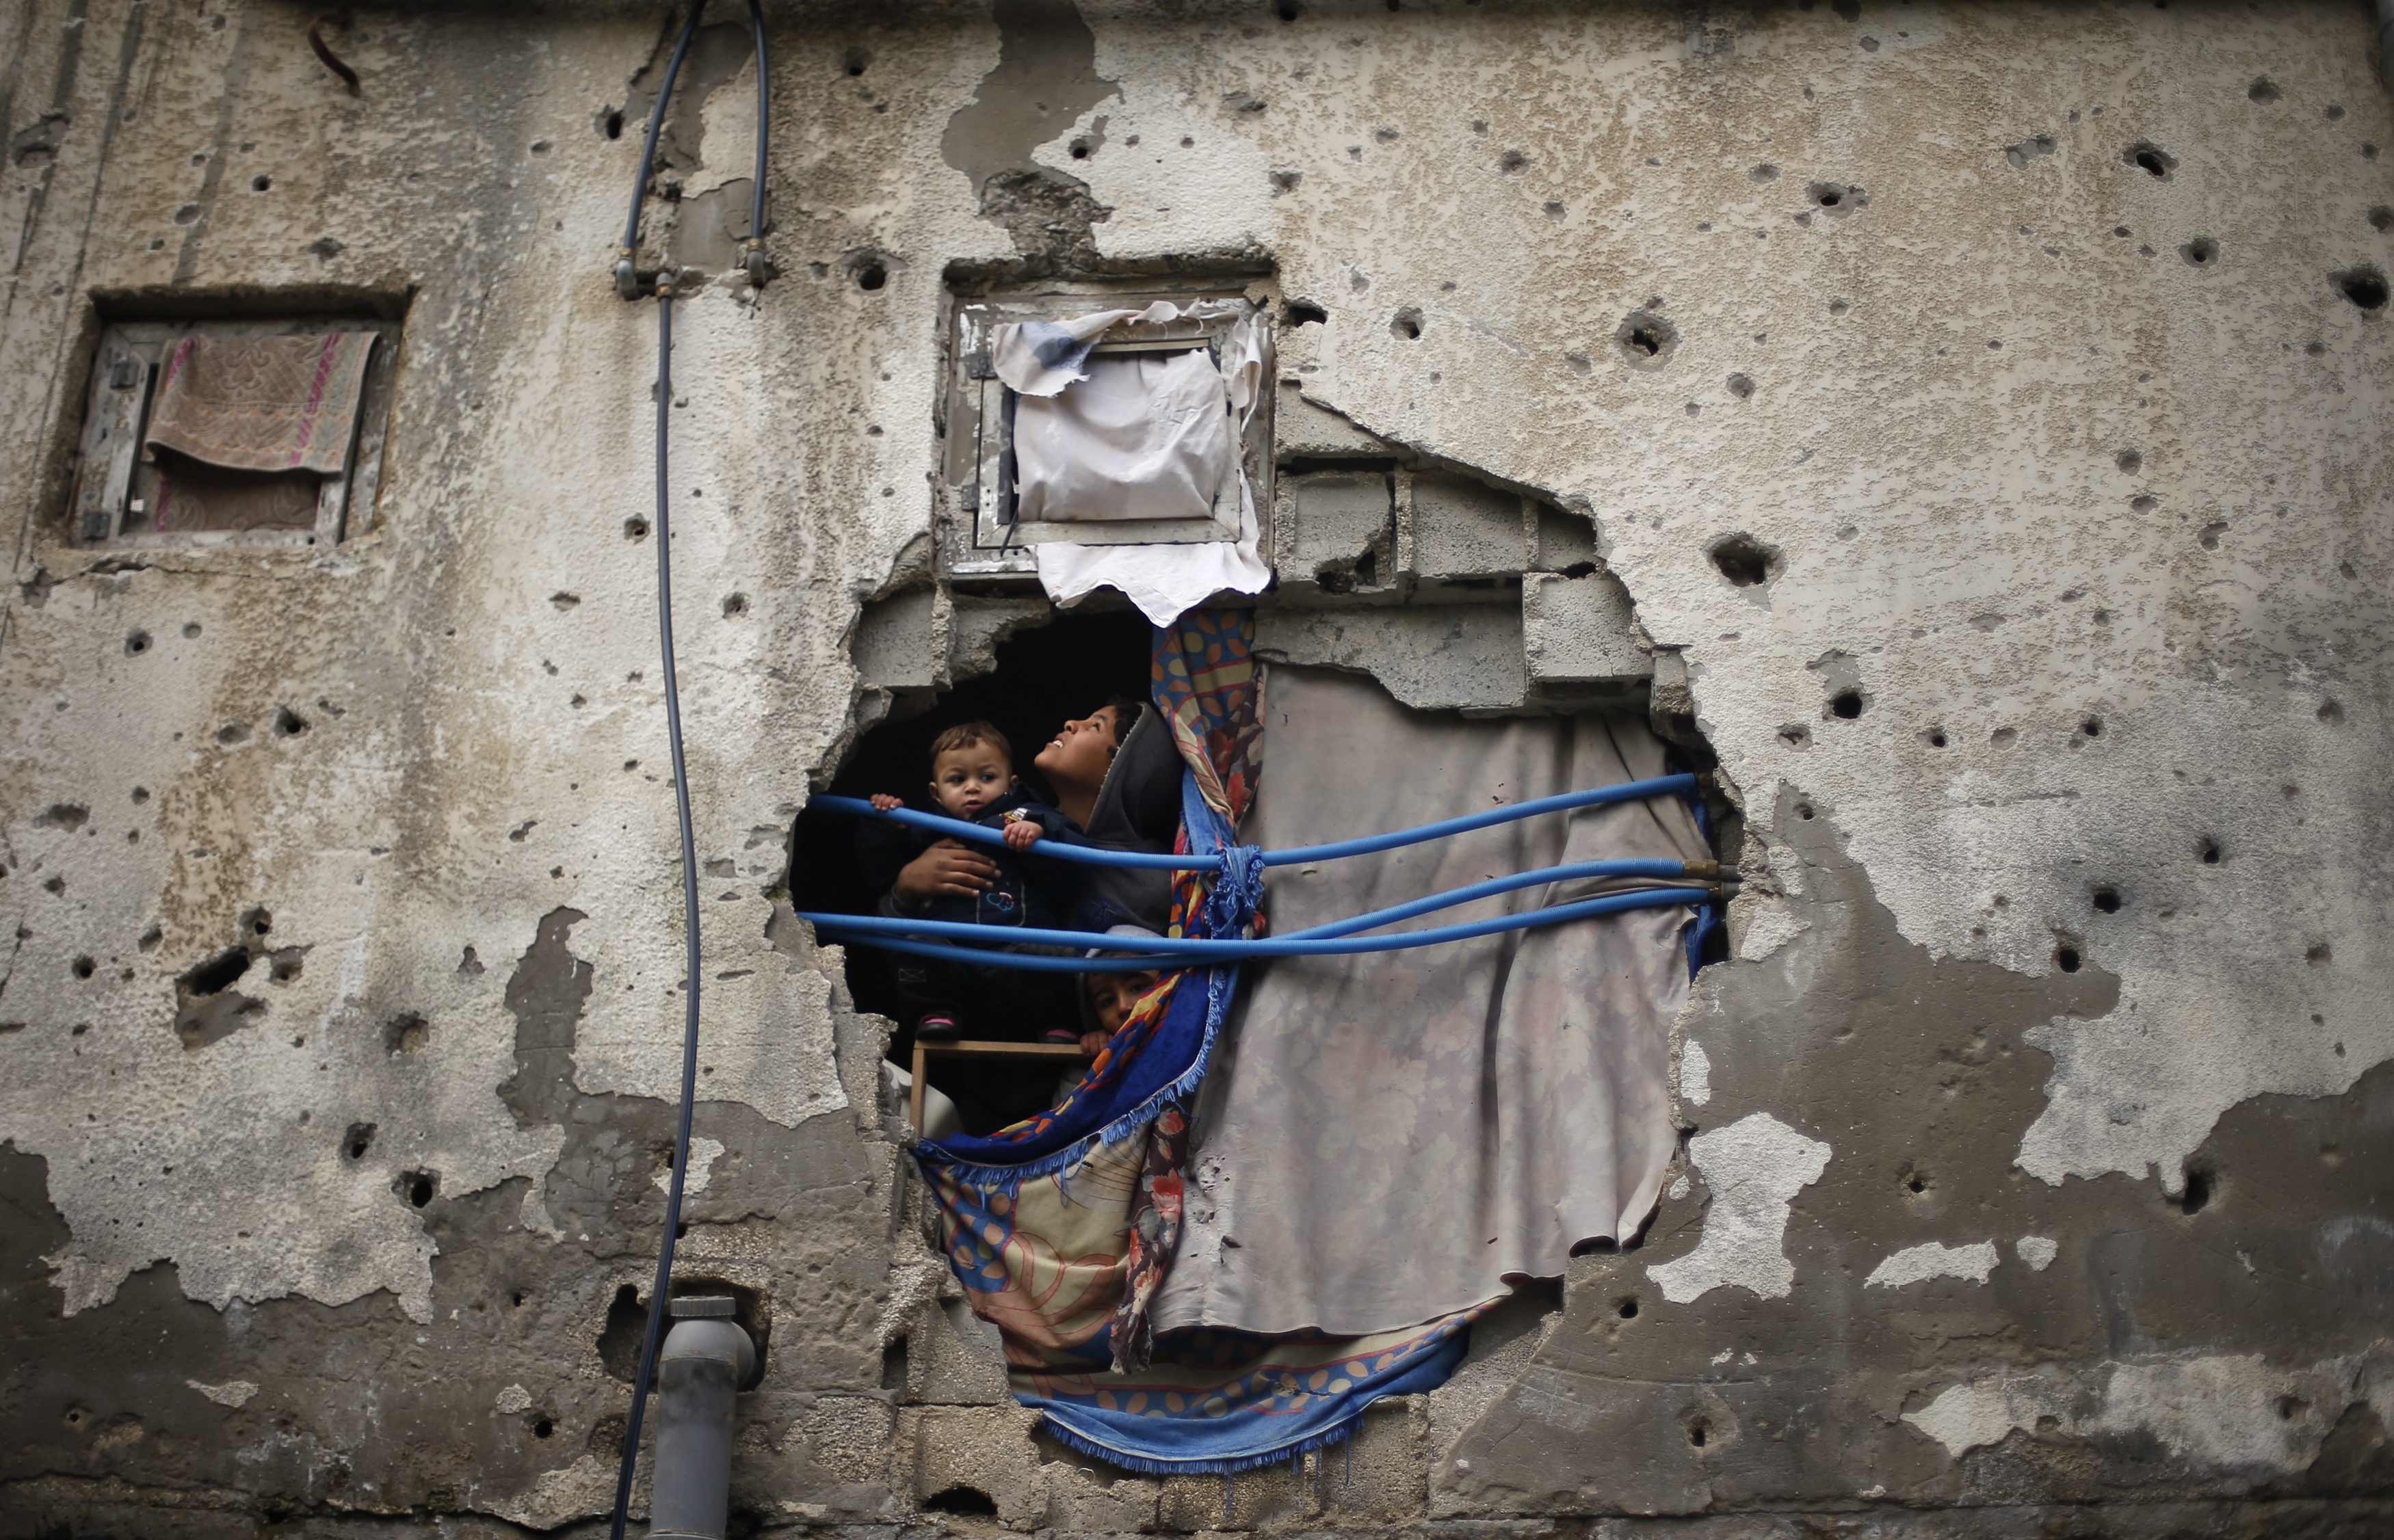 Palestinian children look out through a hole covered with a blanket in their family house, that witnesses said was damaged by Israeli shelling during a 50-day war last summer, in the east of Gaza City January 7, 2015.